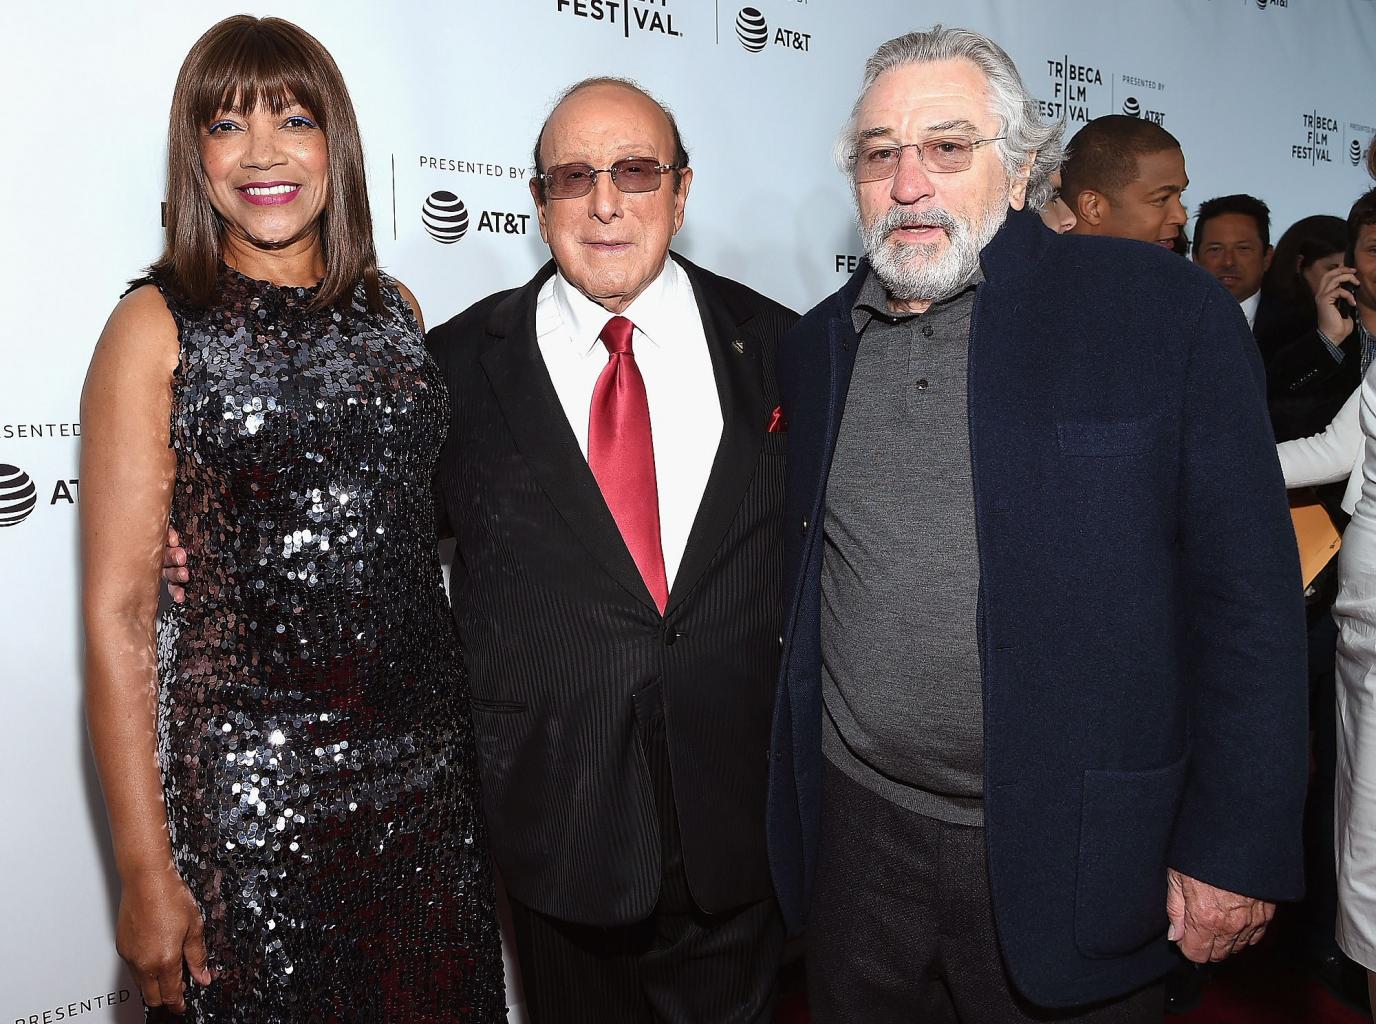 Robert De Niro Feels Good Selecting Clive Davis      '  Documentary to Kickoff Tribeca Film Festival:        This is The Way It Should Be        